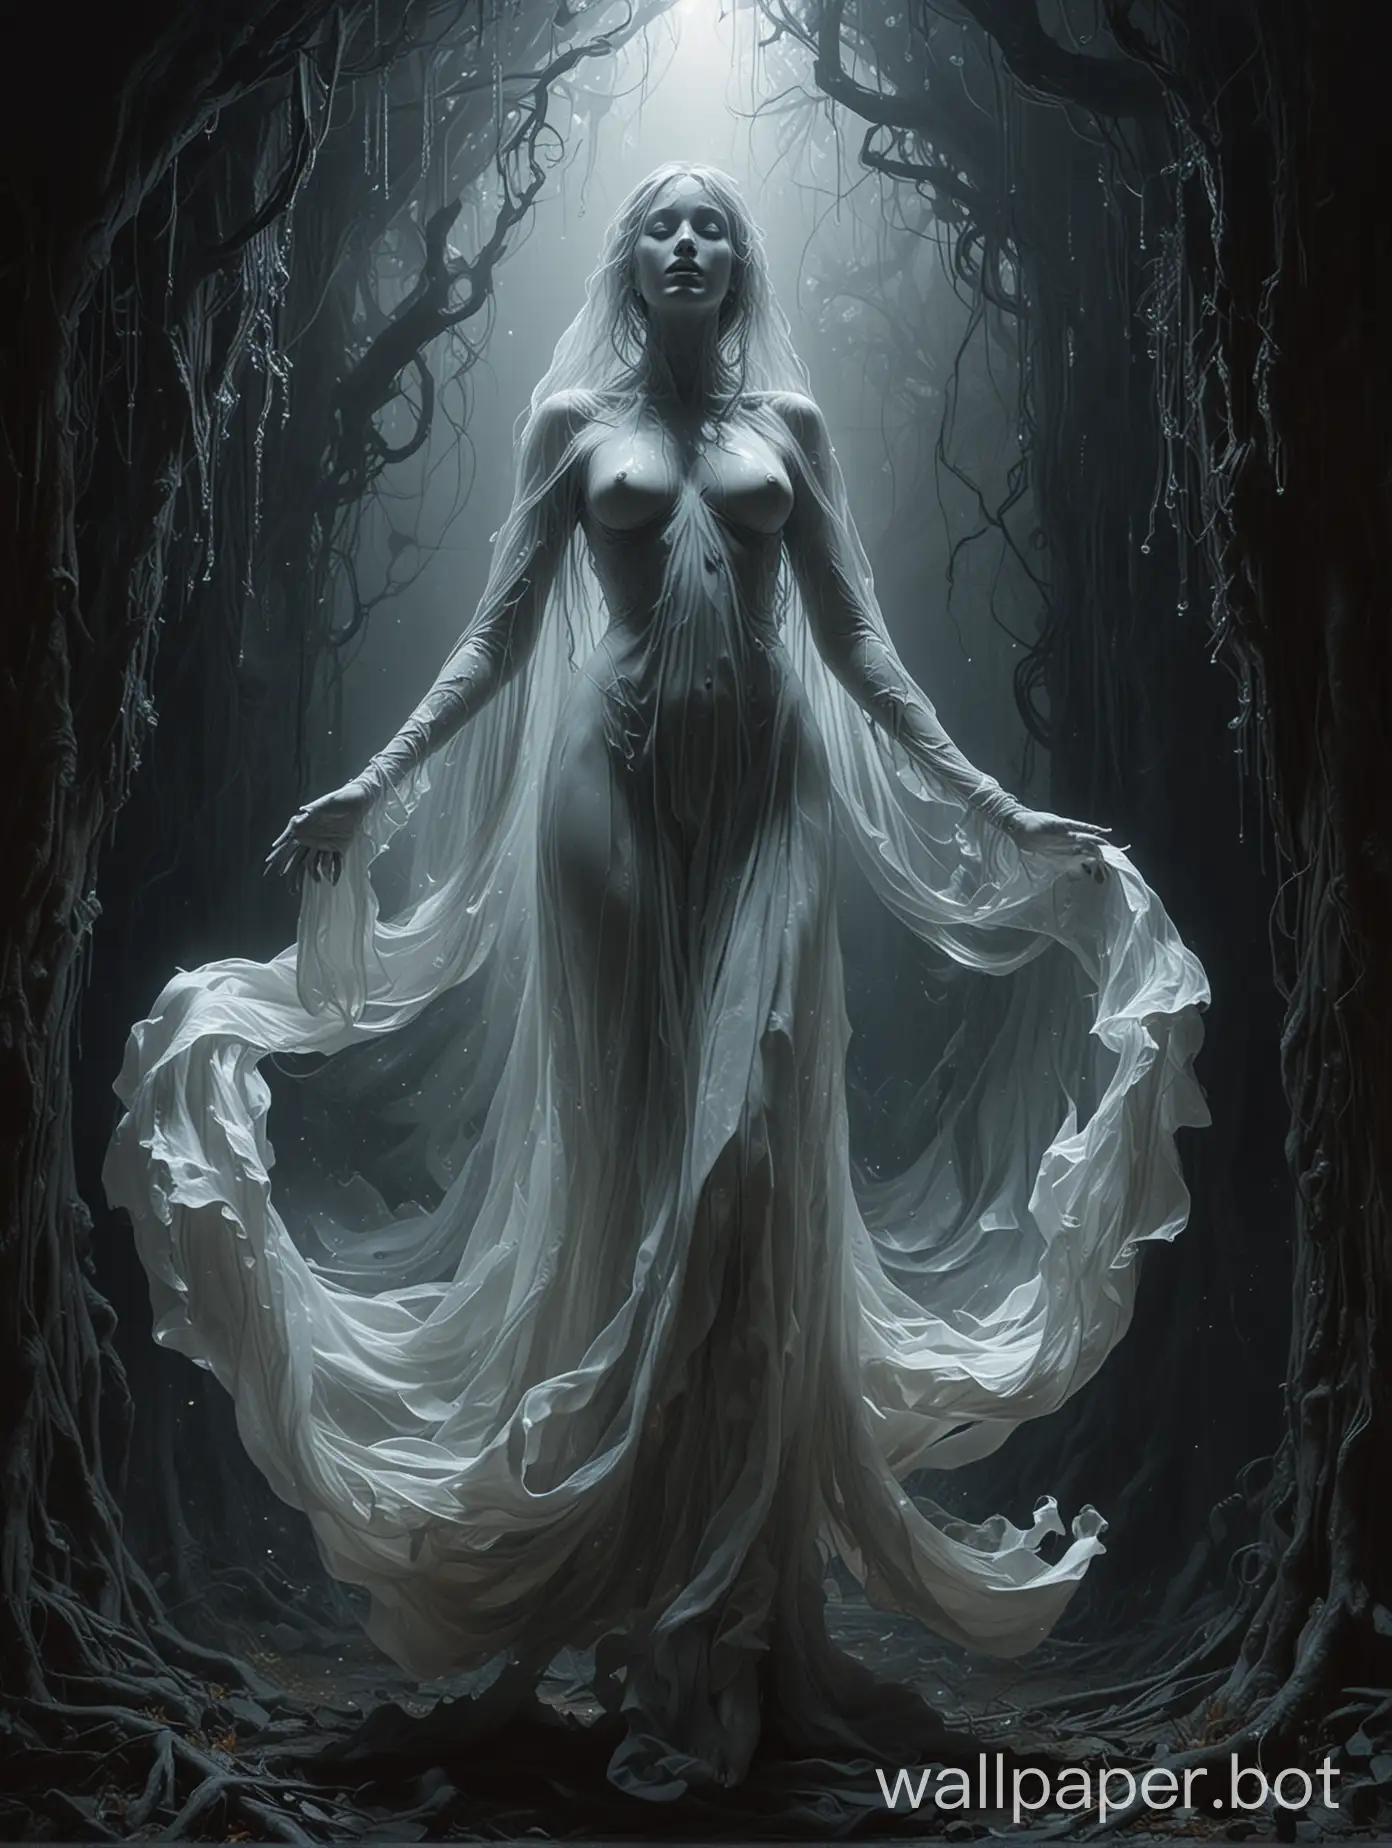 Within the confines of a hauntingly ethereal realm, a spectral being, curvy and endowed, hovers in the luminous abyss. This mesmerizing figure is a phantom-like being composed of shapes and shades that defy definition, their form shifting and undulating in a never-ending dance of light and shadow. The image is a hyper-realistic digital painting, meticulously rendered with startling detail and depth. Every pixel seems to pulsate with an otherworldly energy, drawing viewers into a trance-like state as they contemplate the enigmatic presence before them. This ghostly apparition is a masterful blend of artistry and mystique, a true testament to the power of imagination and creativity in the world of virtual art.